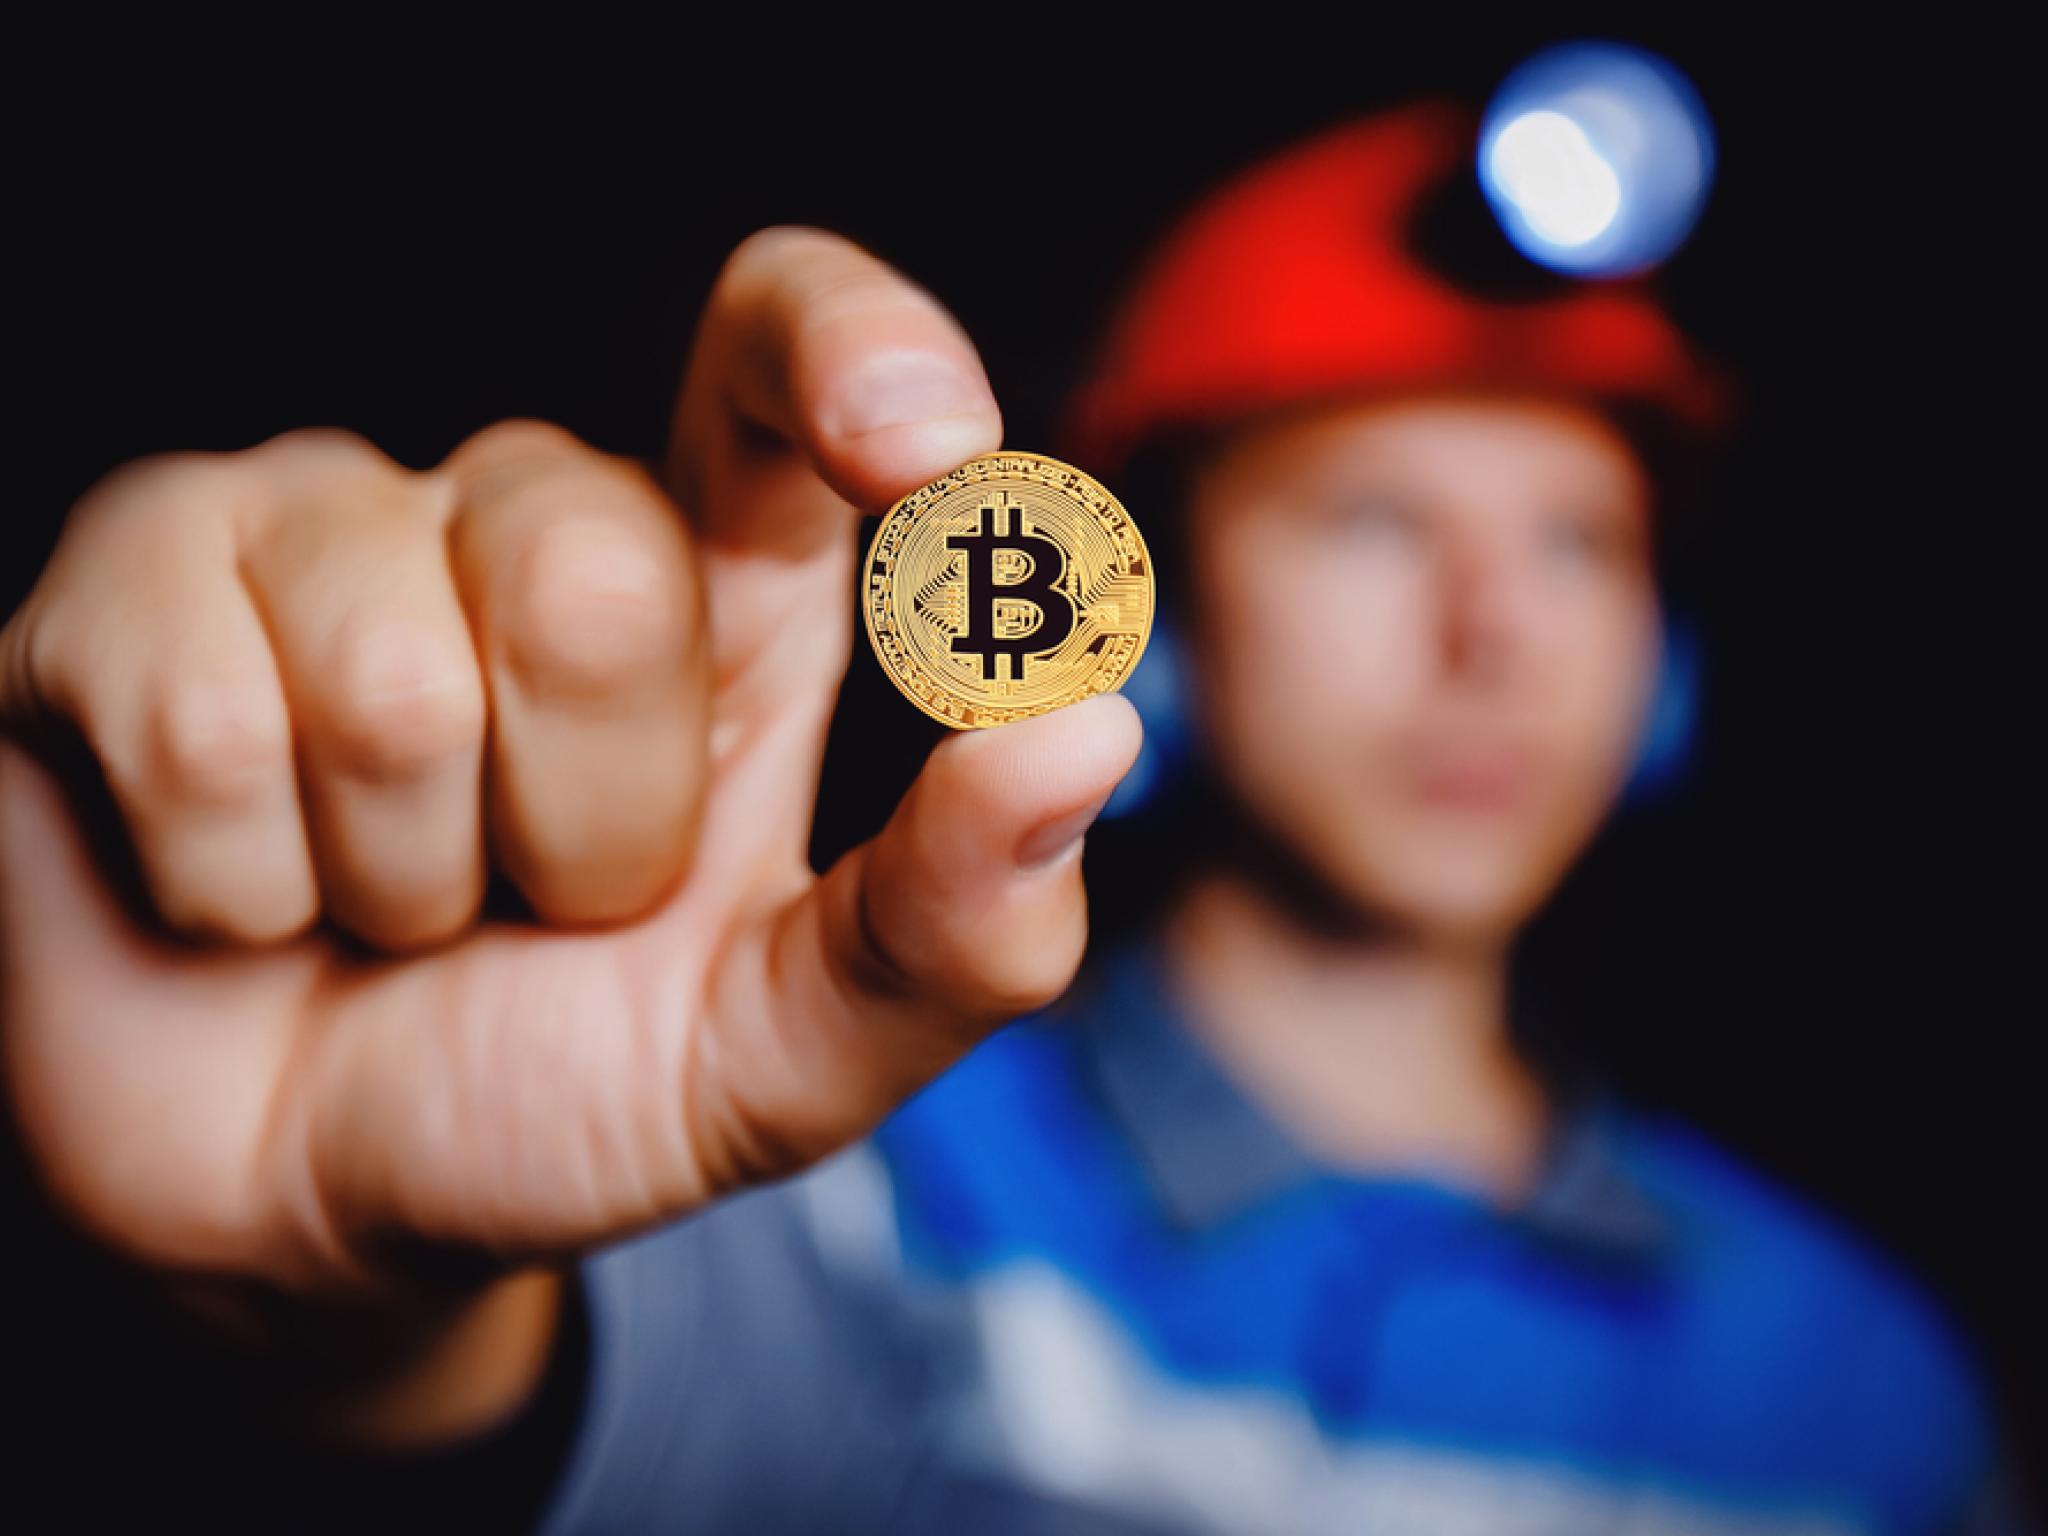  european-law-agency-says-bitcoin-mining-vulnerable-to-financial-crimes-even-as-donald-trump-cosies-up-to-the-industry 